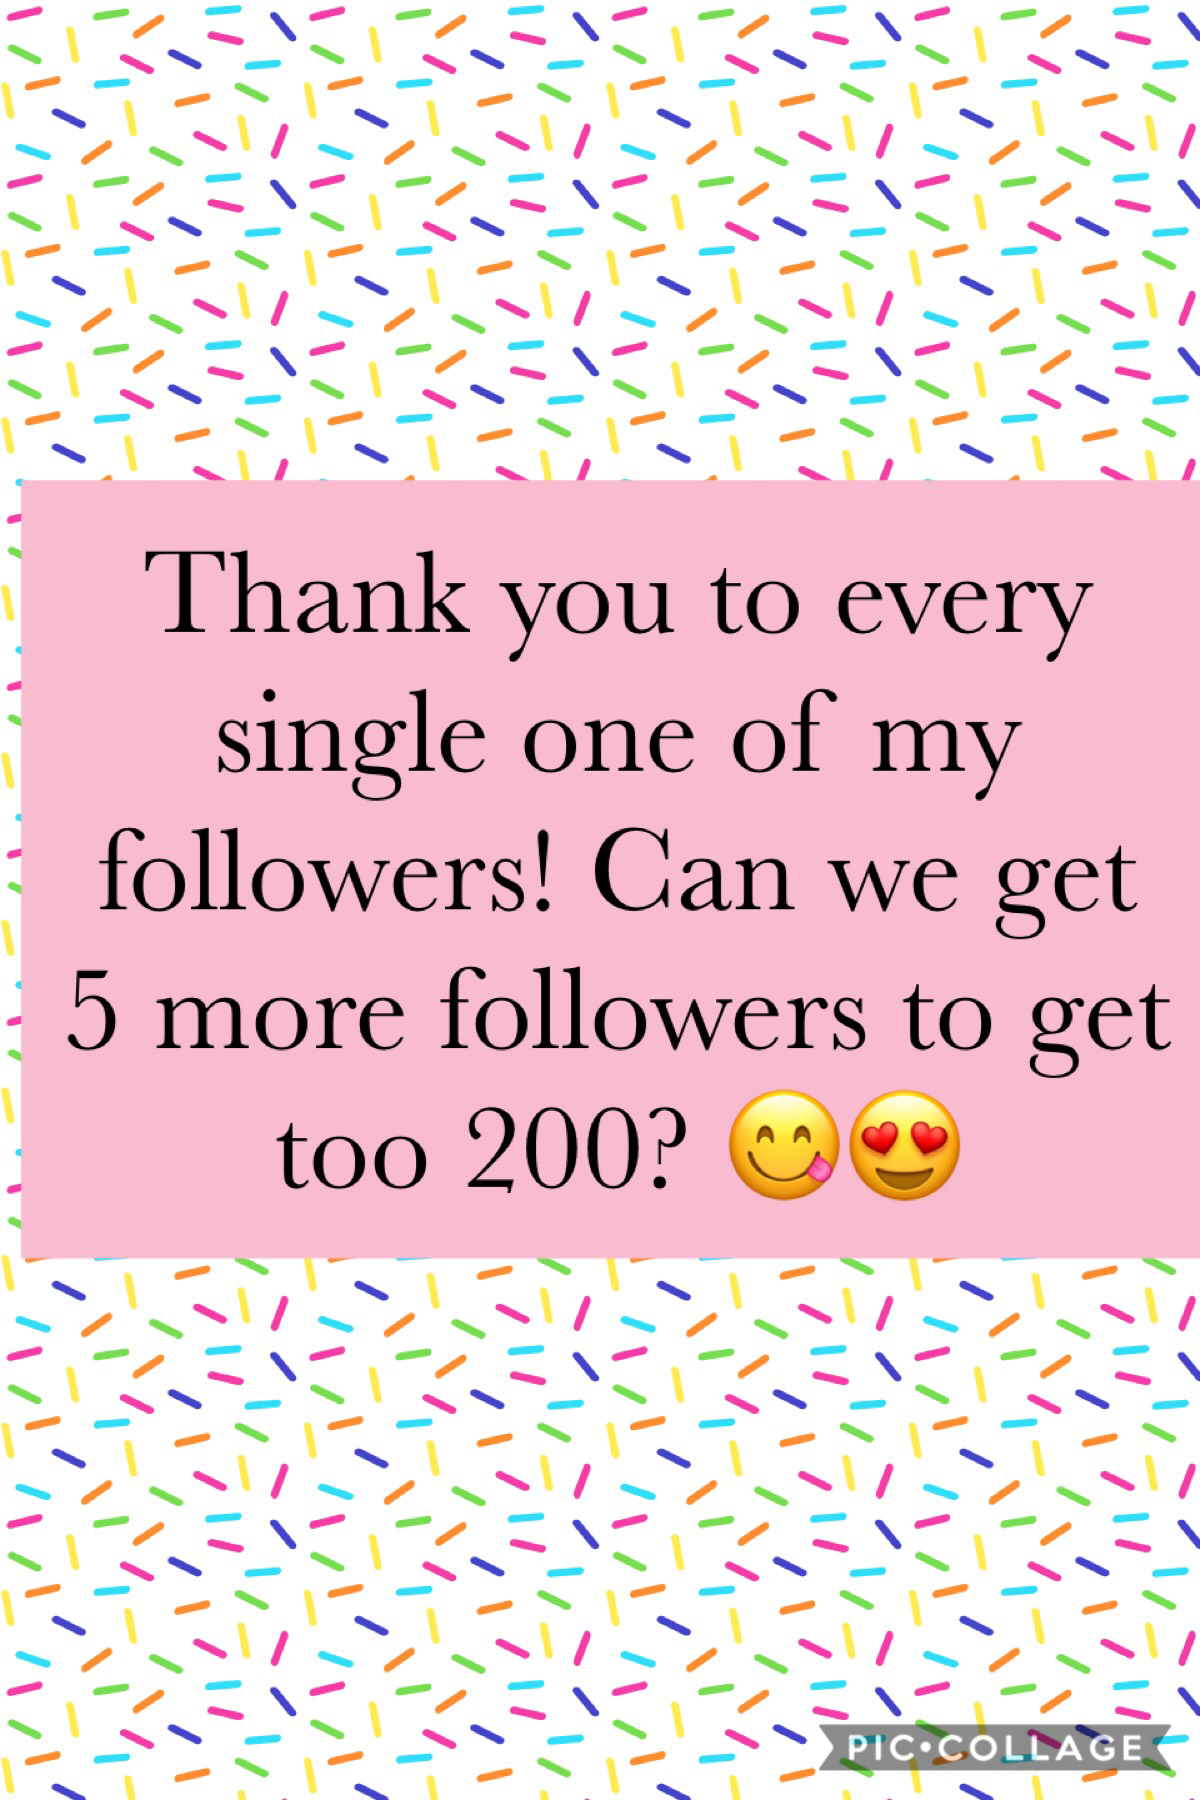 Thx so much! Be sure to follow me on Instagram at raaya1500